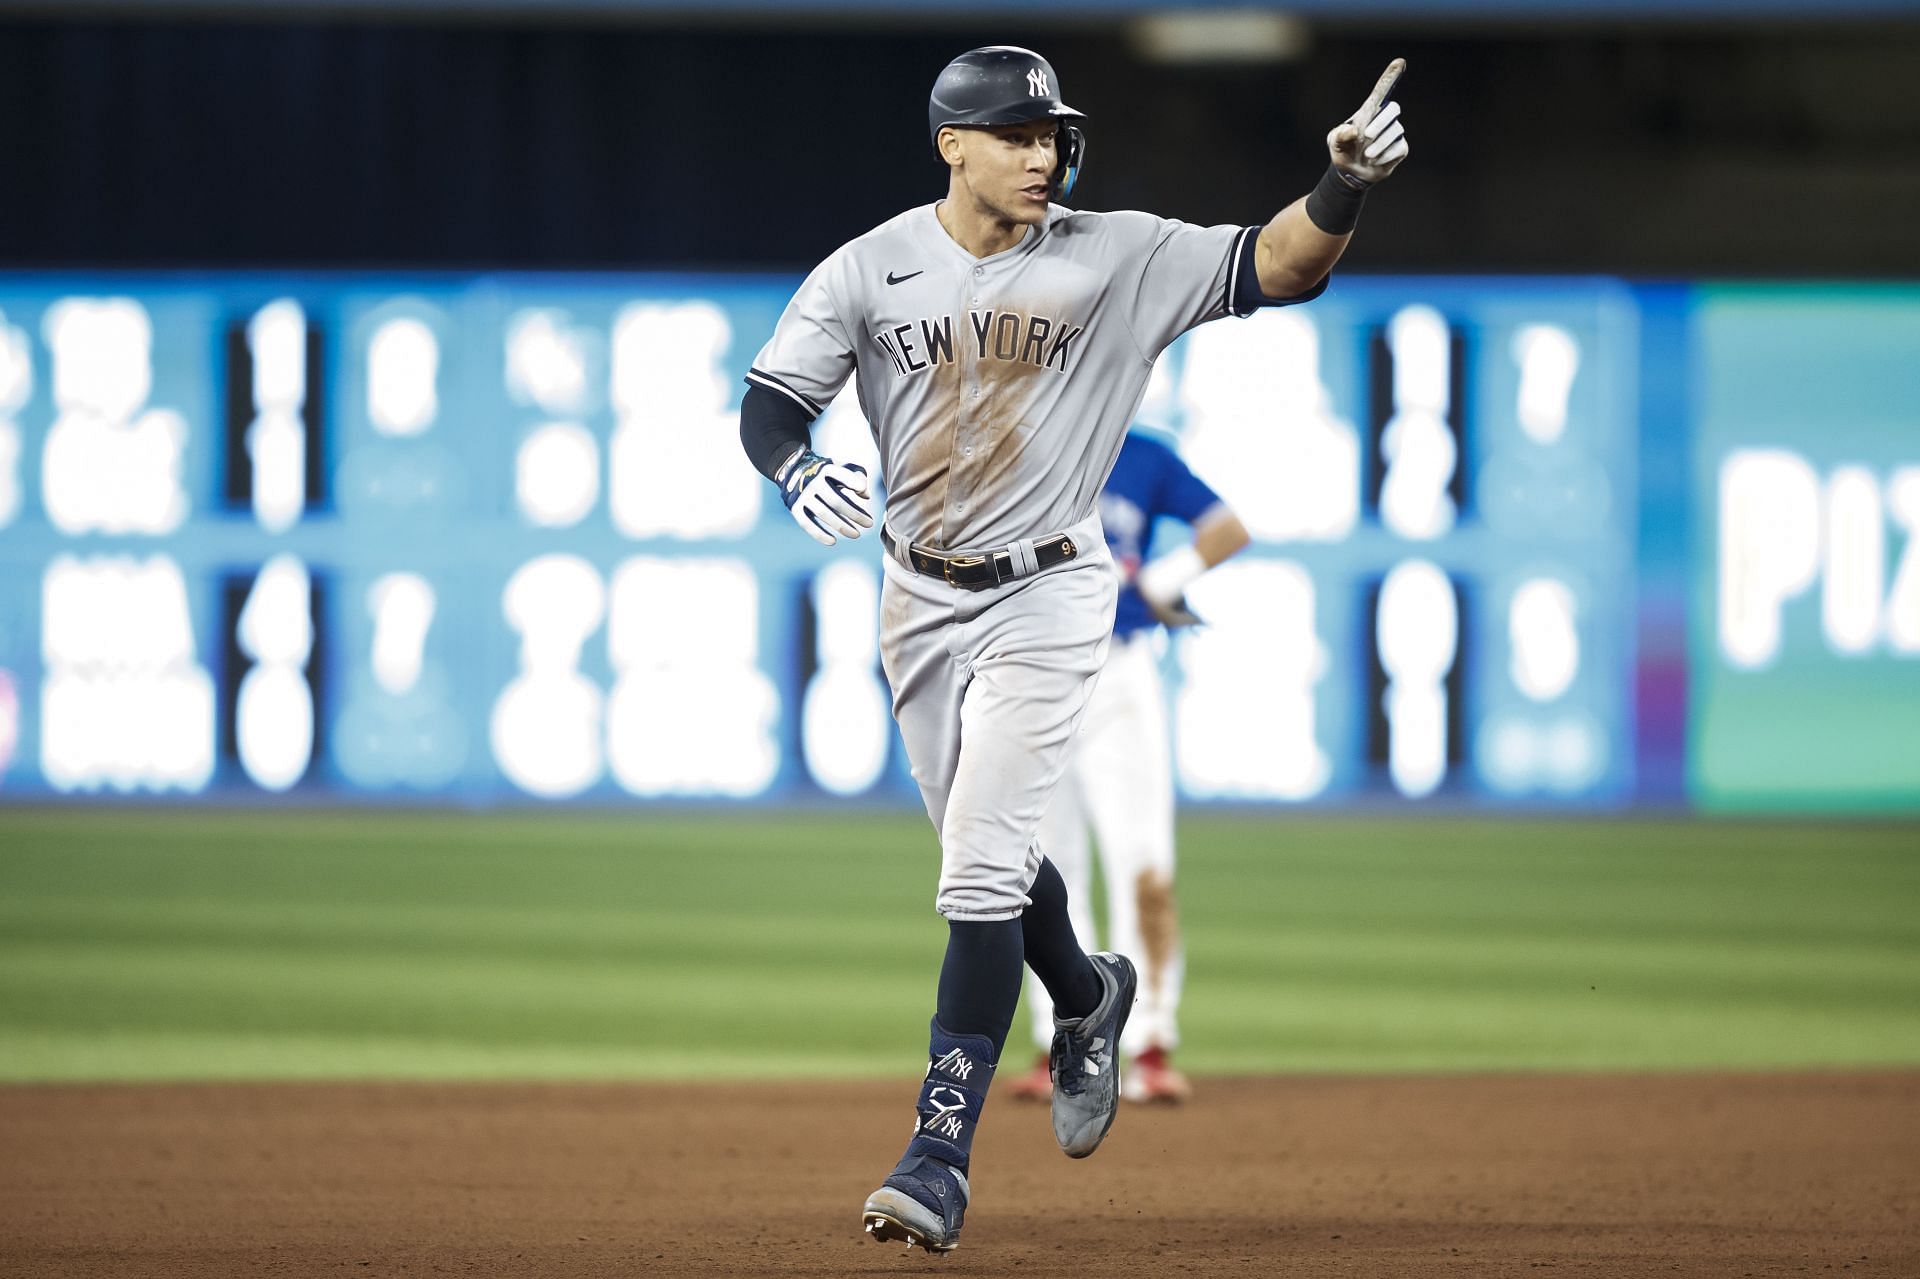 Judge #99 of the New York Yankees runs the bases as he hits his 61st home run of the season in the seventh inning against the Toronto Blue Jays at Rogers Centre on September 28, 2022 in Toronto, Ontario, Canada.